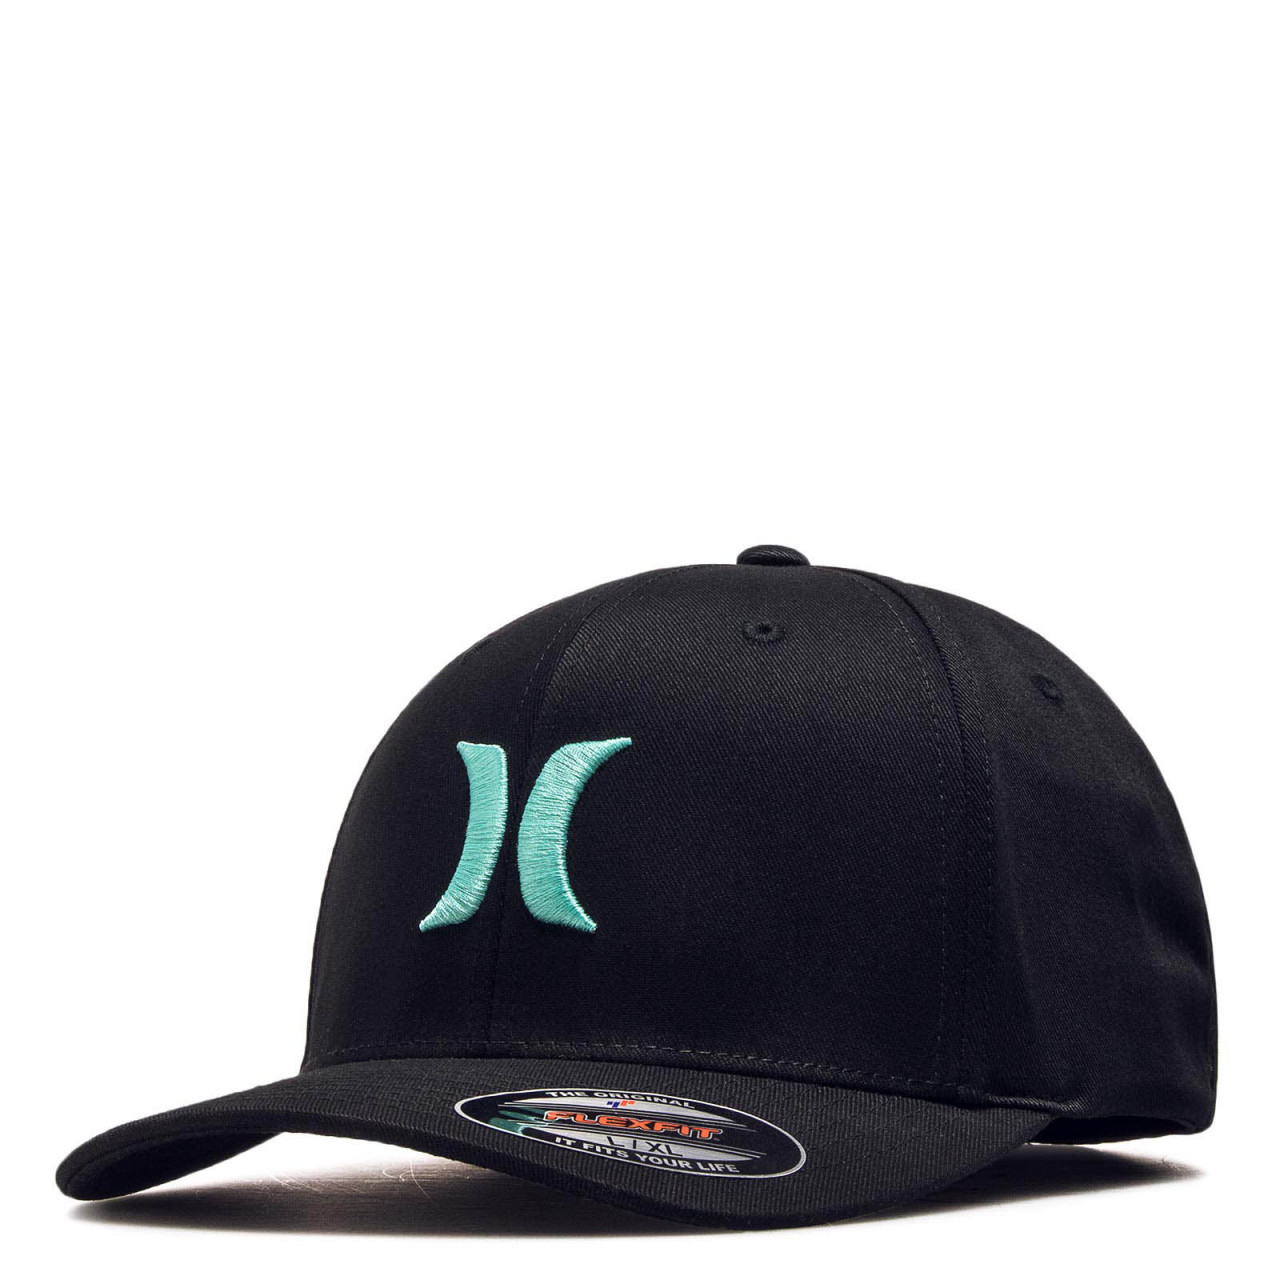 5-Panel Cap One Only Black Mint